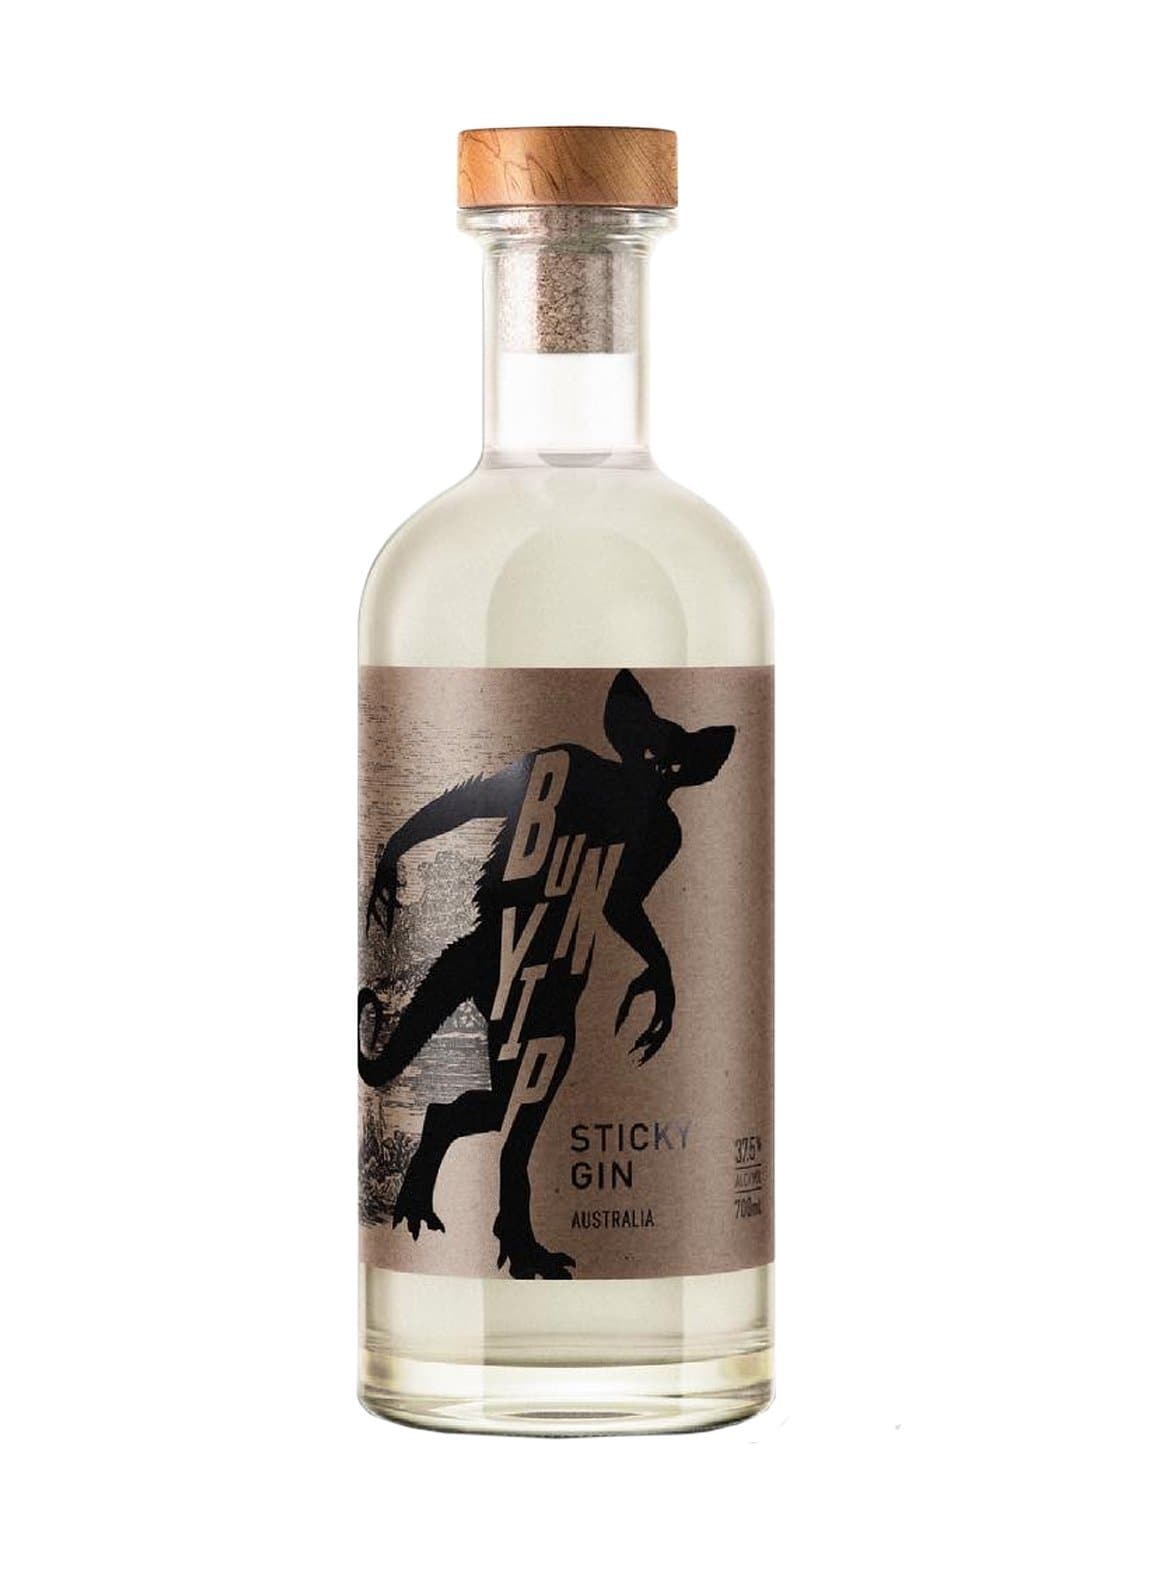 Bunyip Sticky Gin 37.5% 700ml | Gin | Shop online at Spirits of France